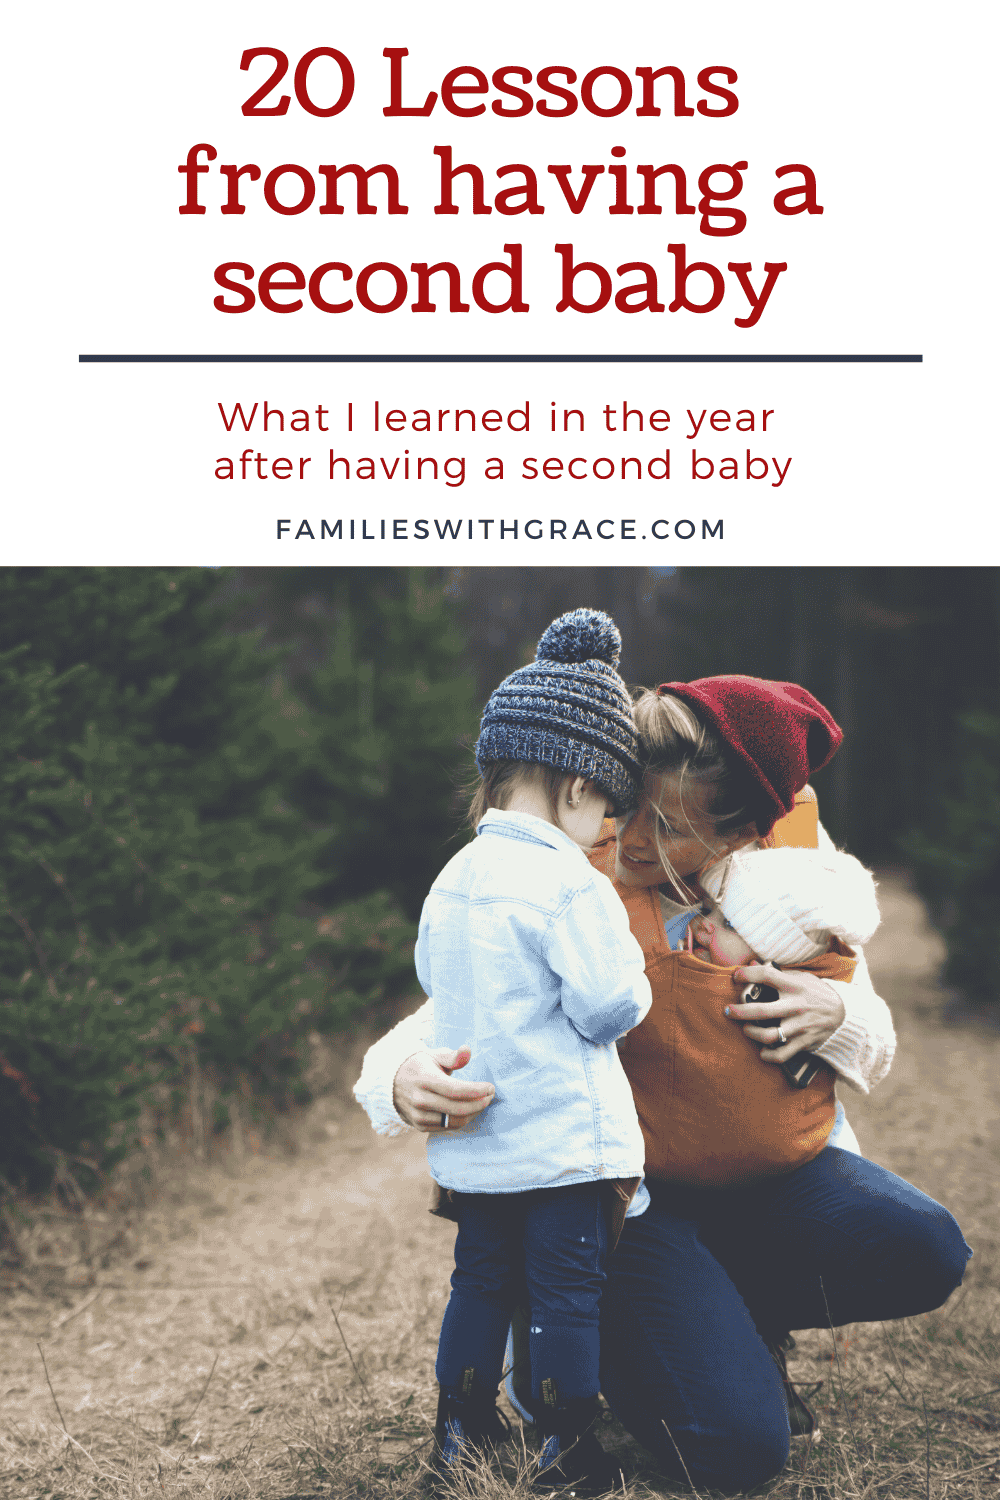 20 Lessons from having a second baby